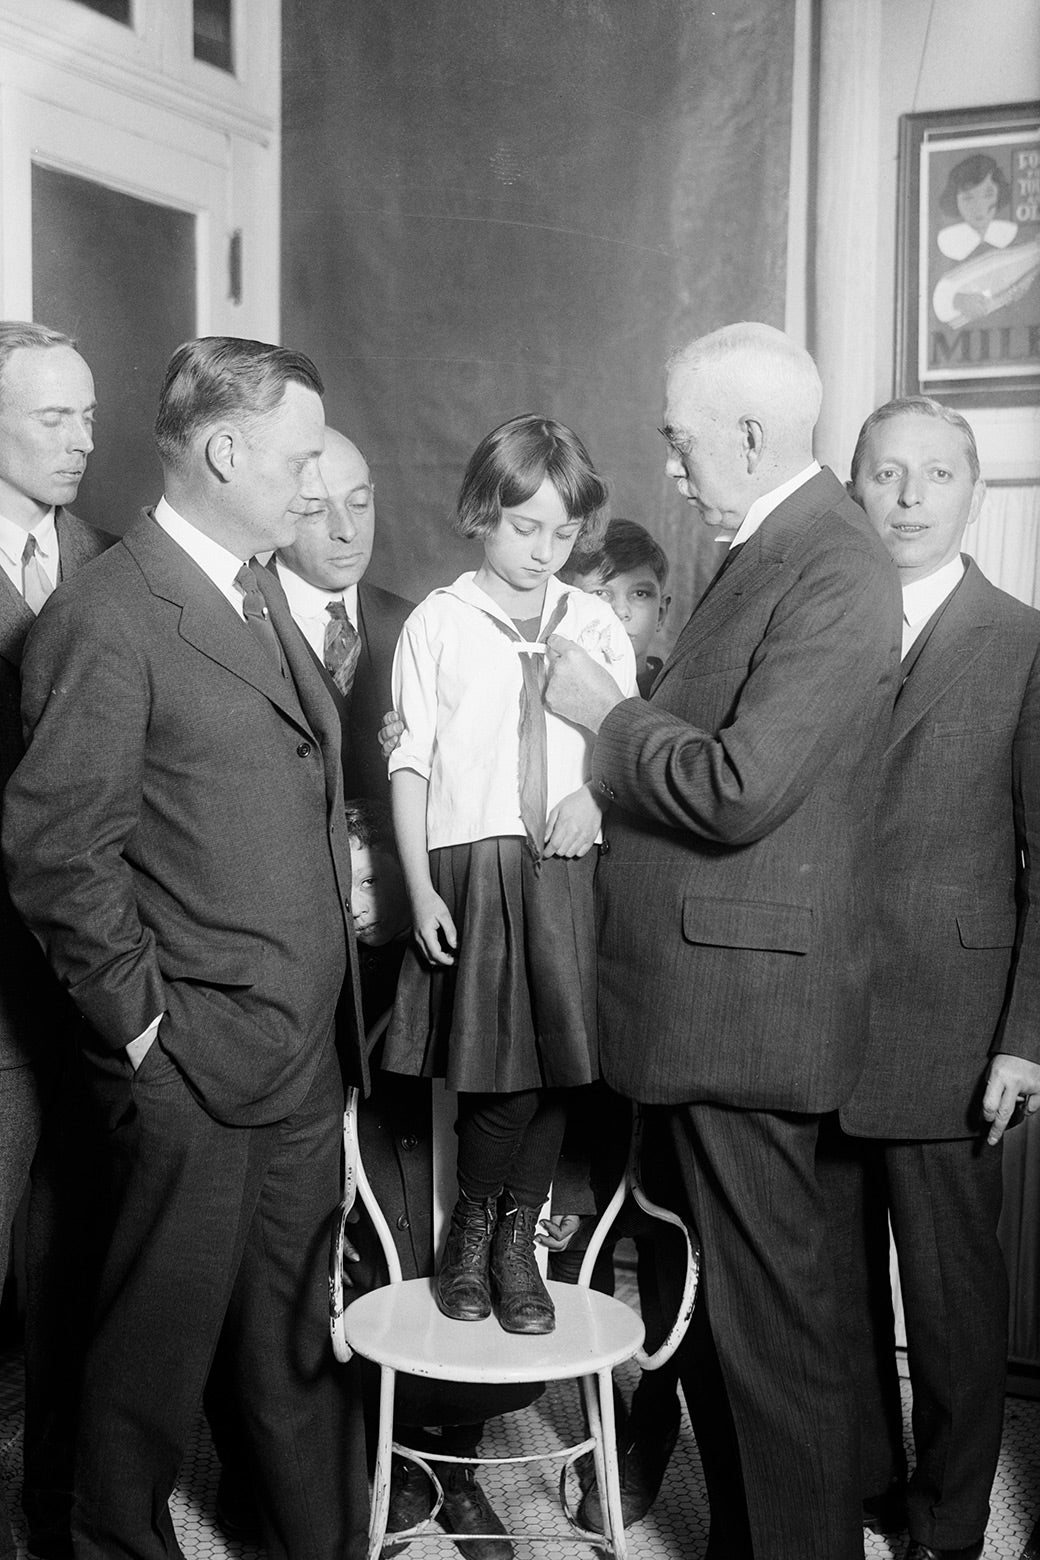 A girl stands on a chair surrounded by men while a man puts a button on her shirt.